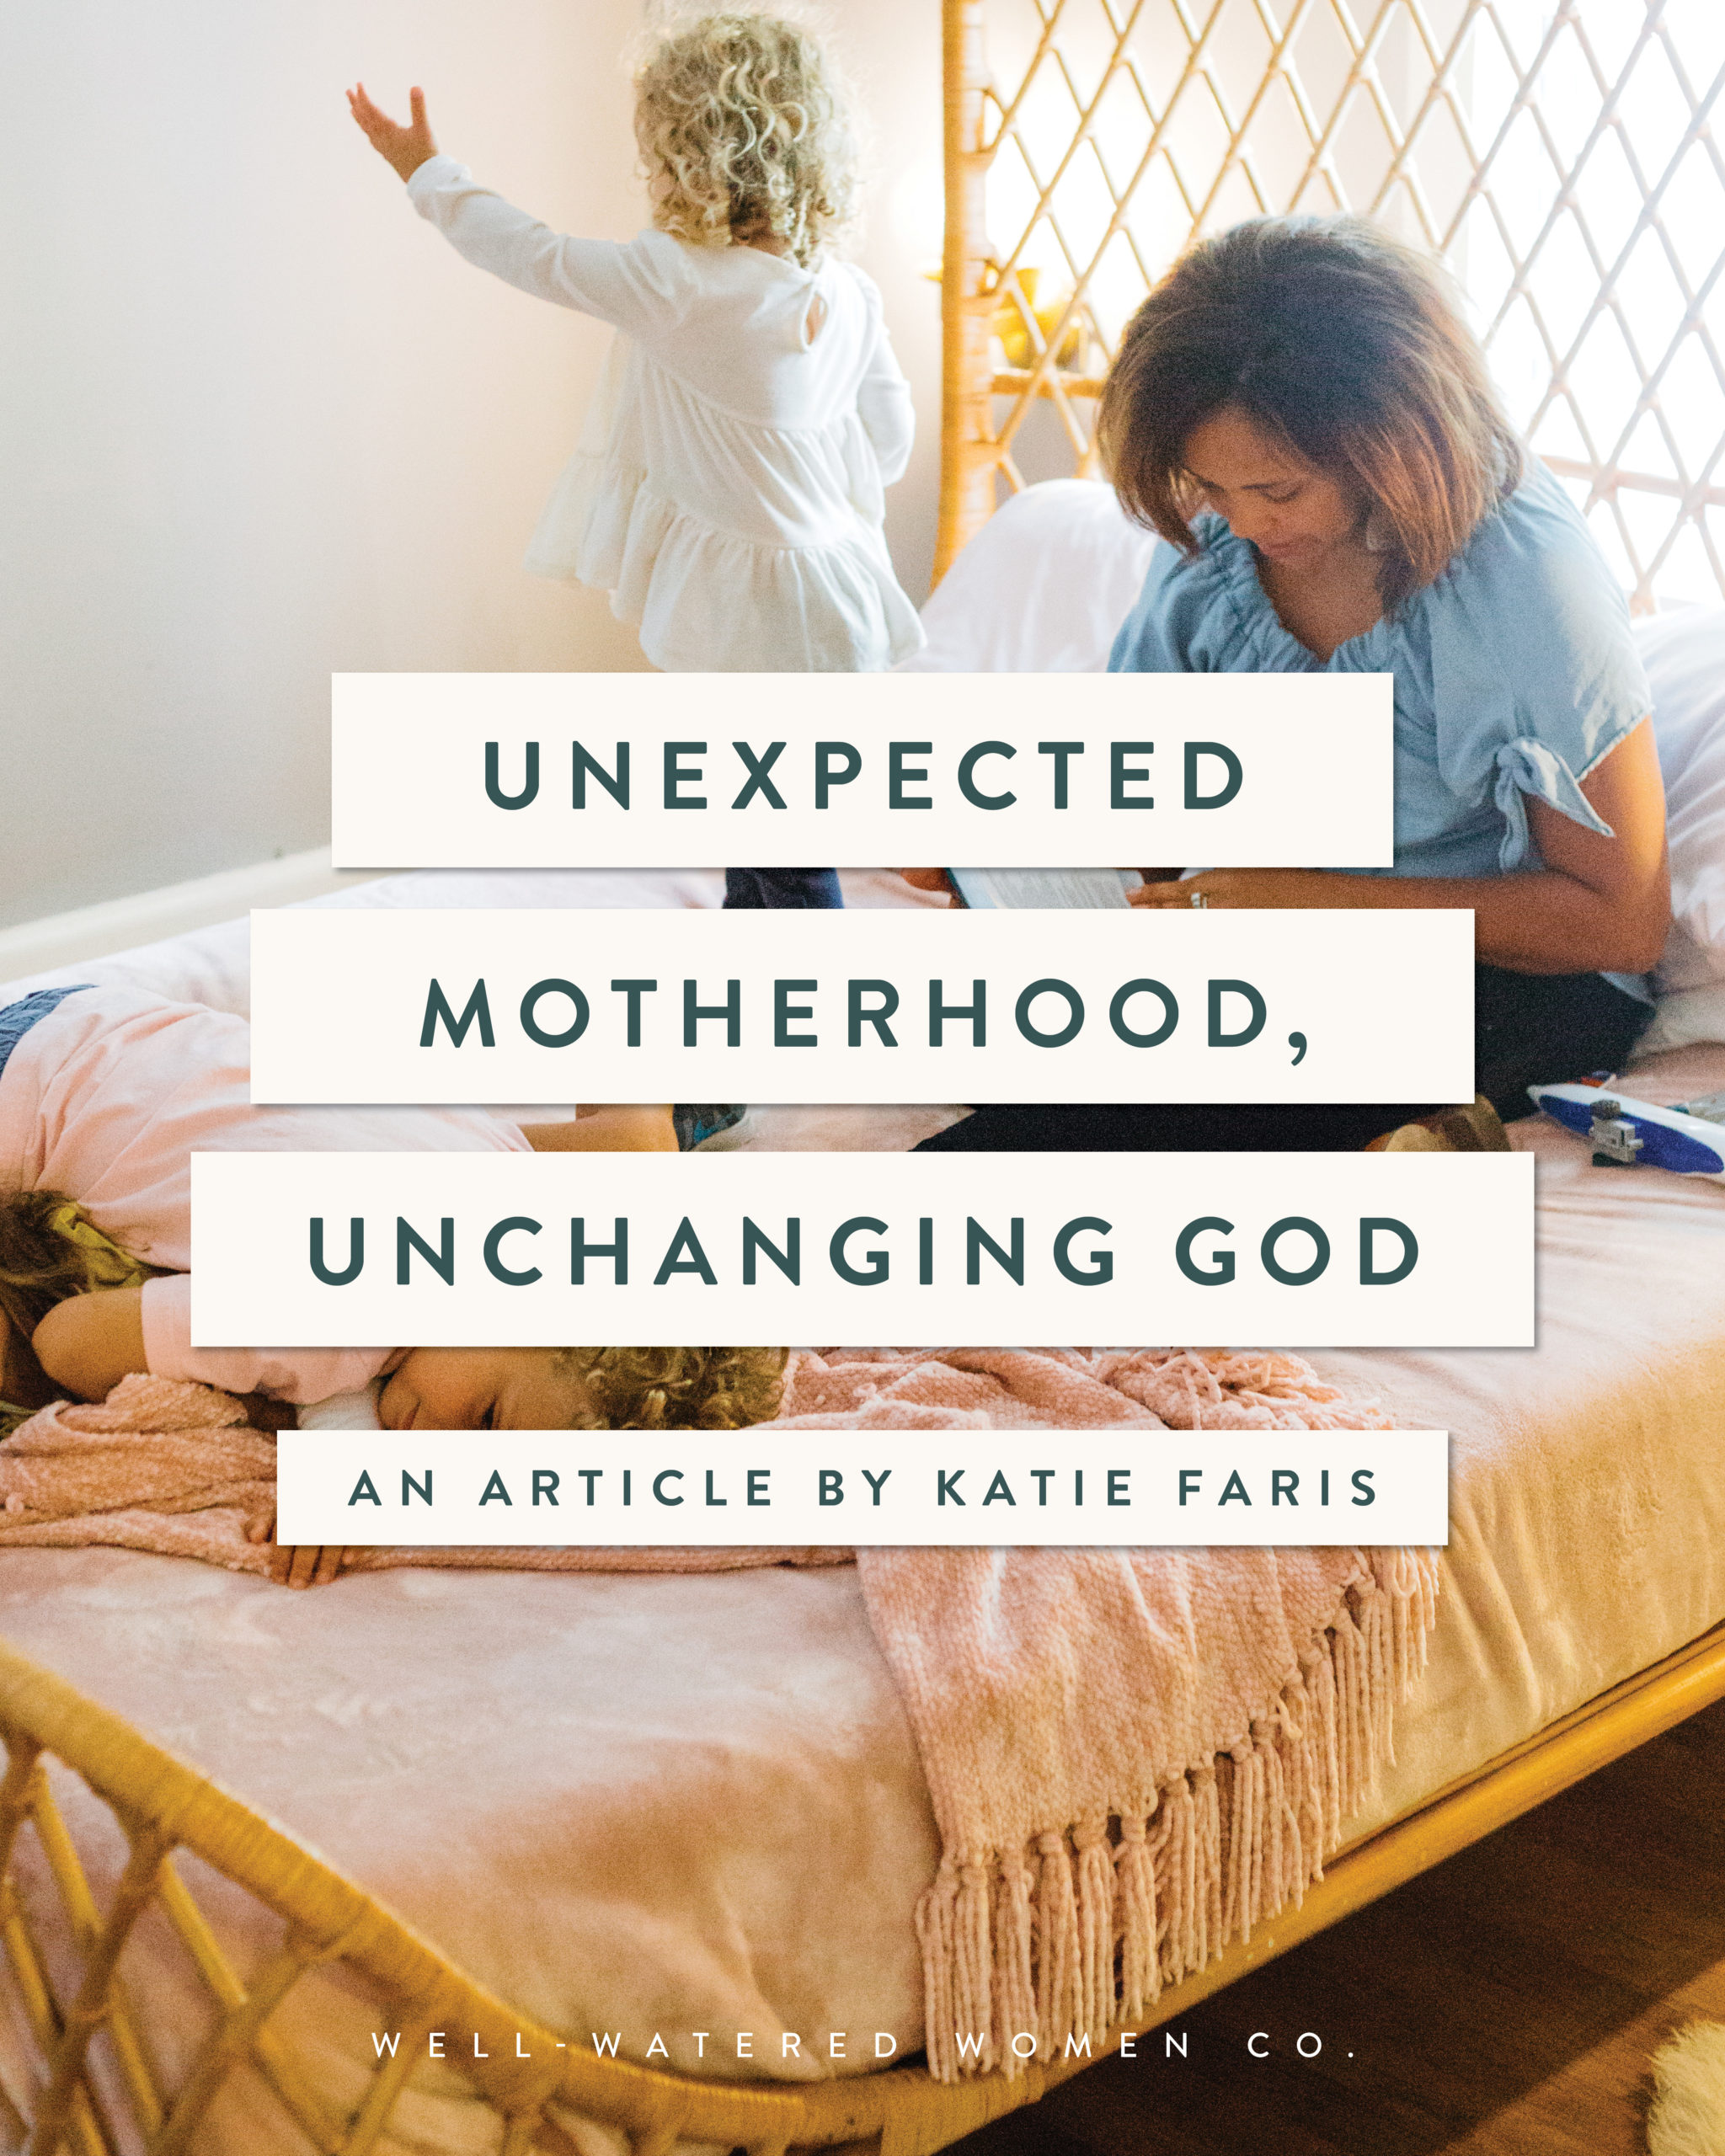 Unexpected Motherhood, Unchanging God - an article from Well-Watered Women